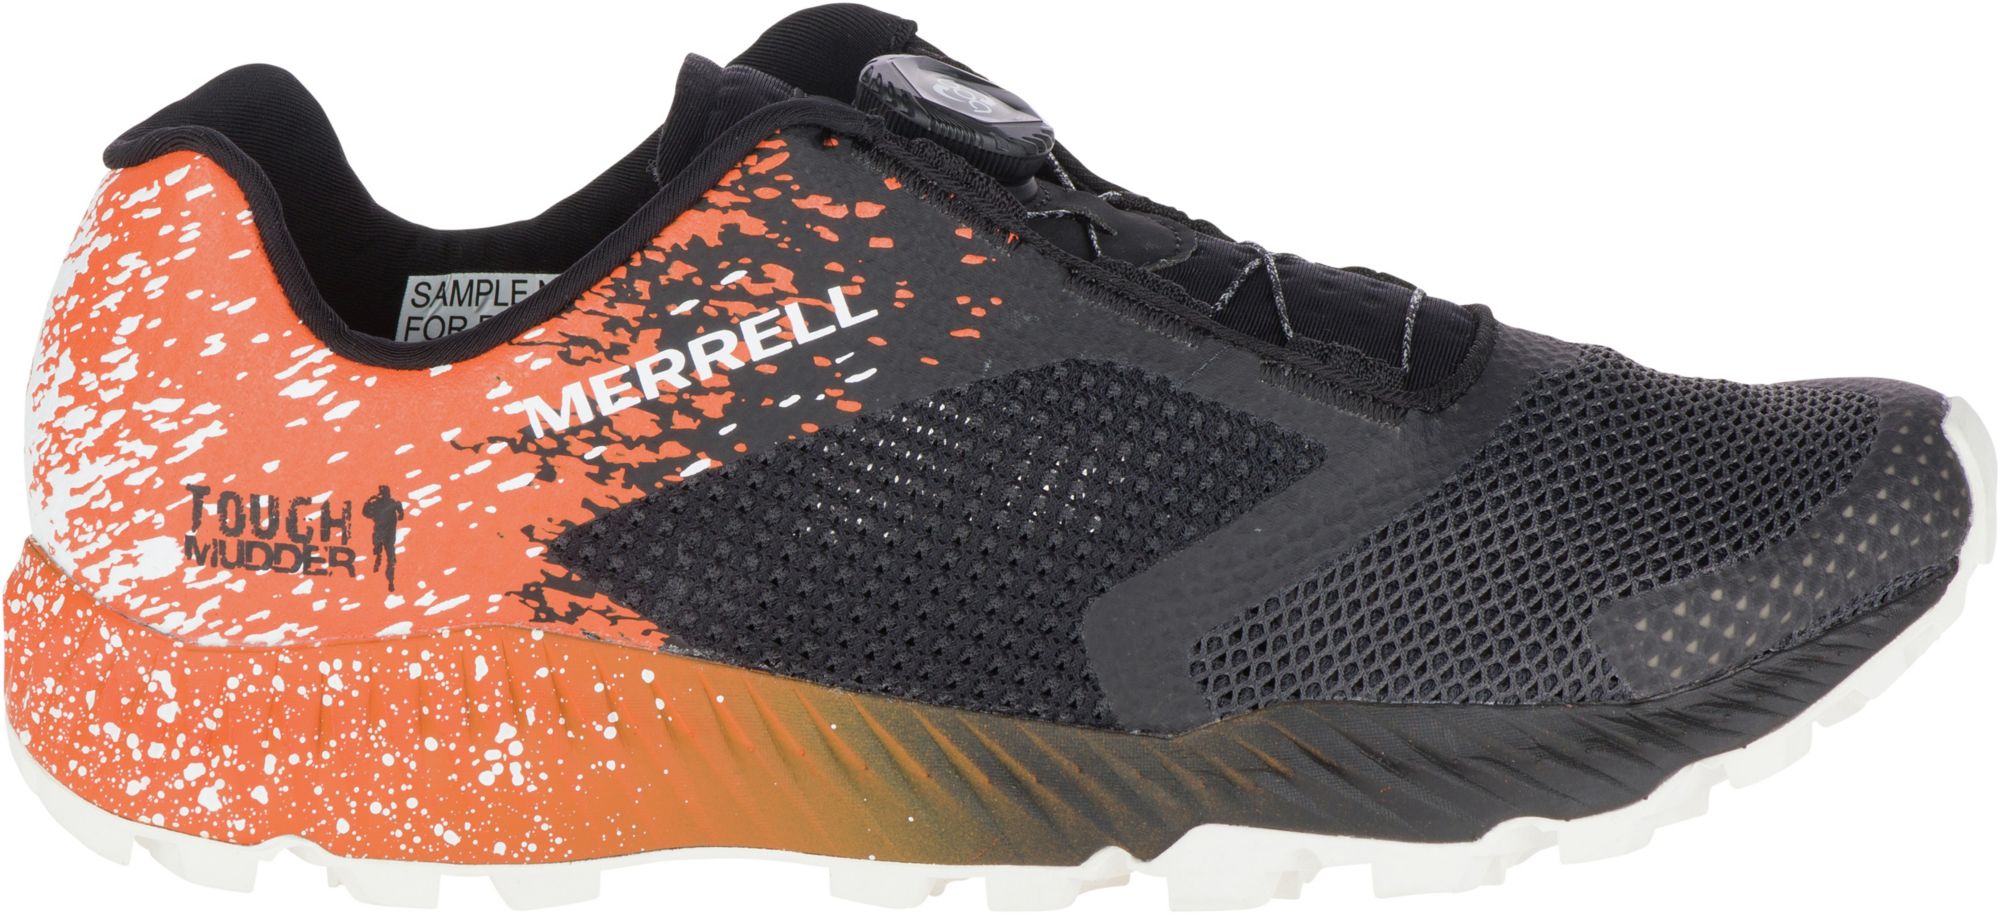 merrell all out crush